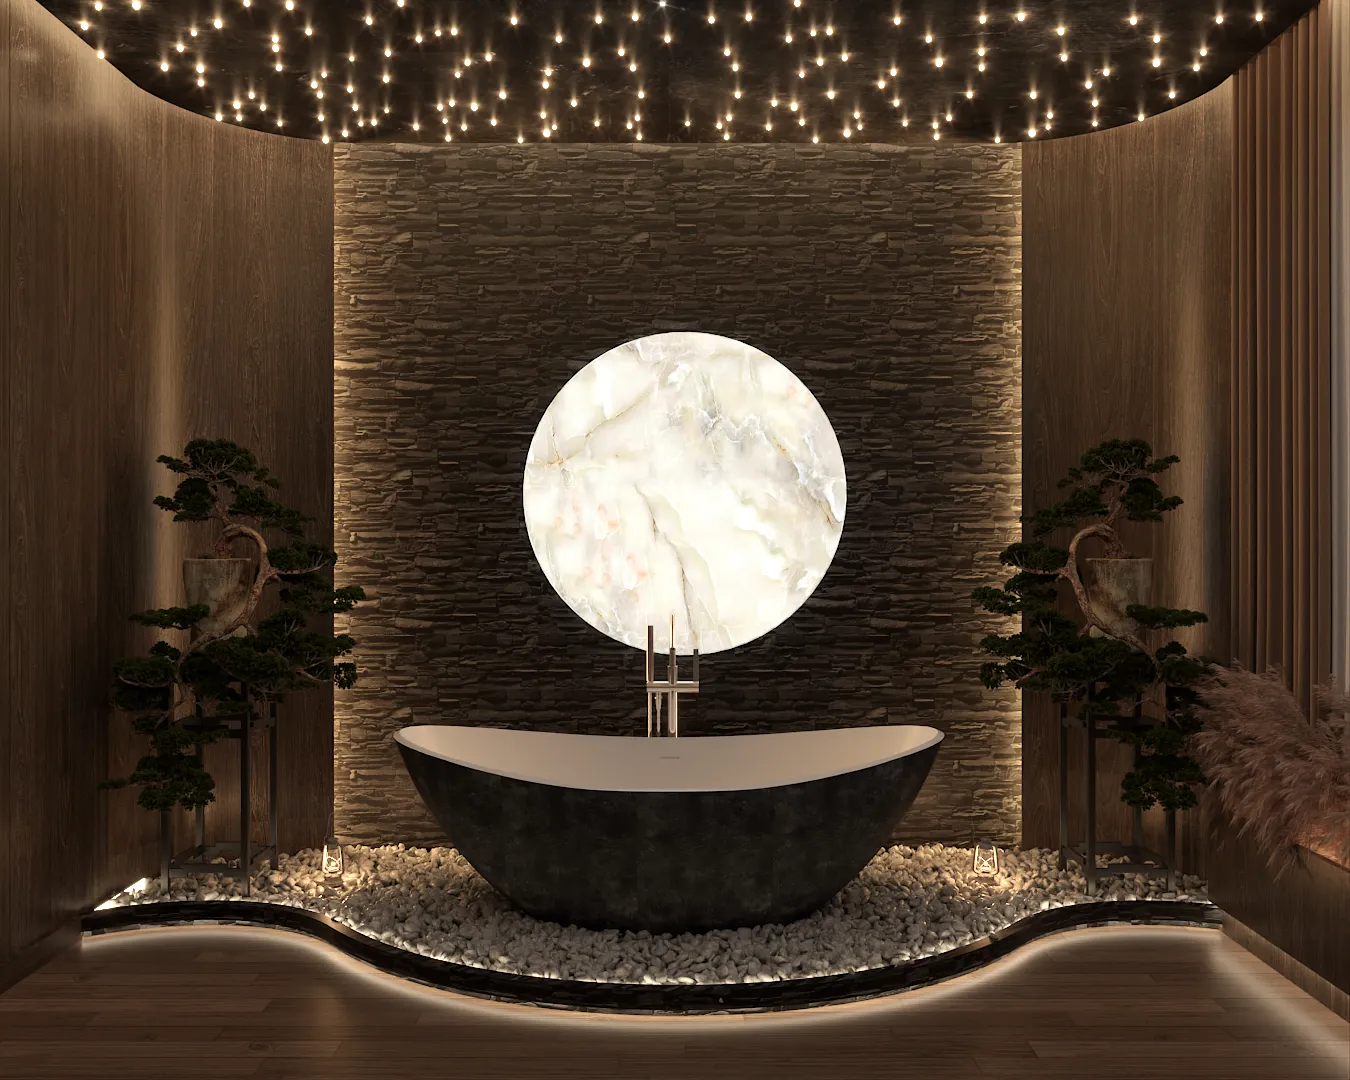 A luxurious bathroom with a central glowing moon sink and ambient lighting, designed by Debora, an online interior design service based in New York City.